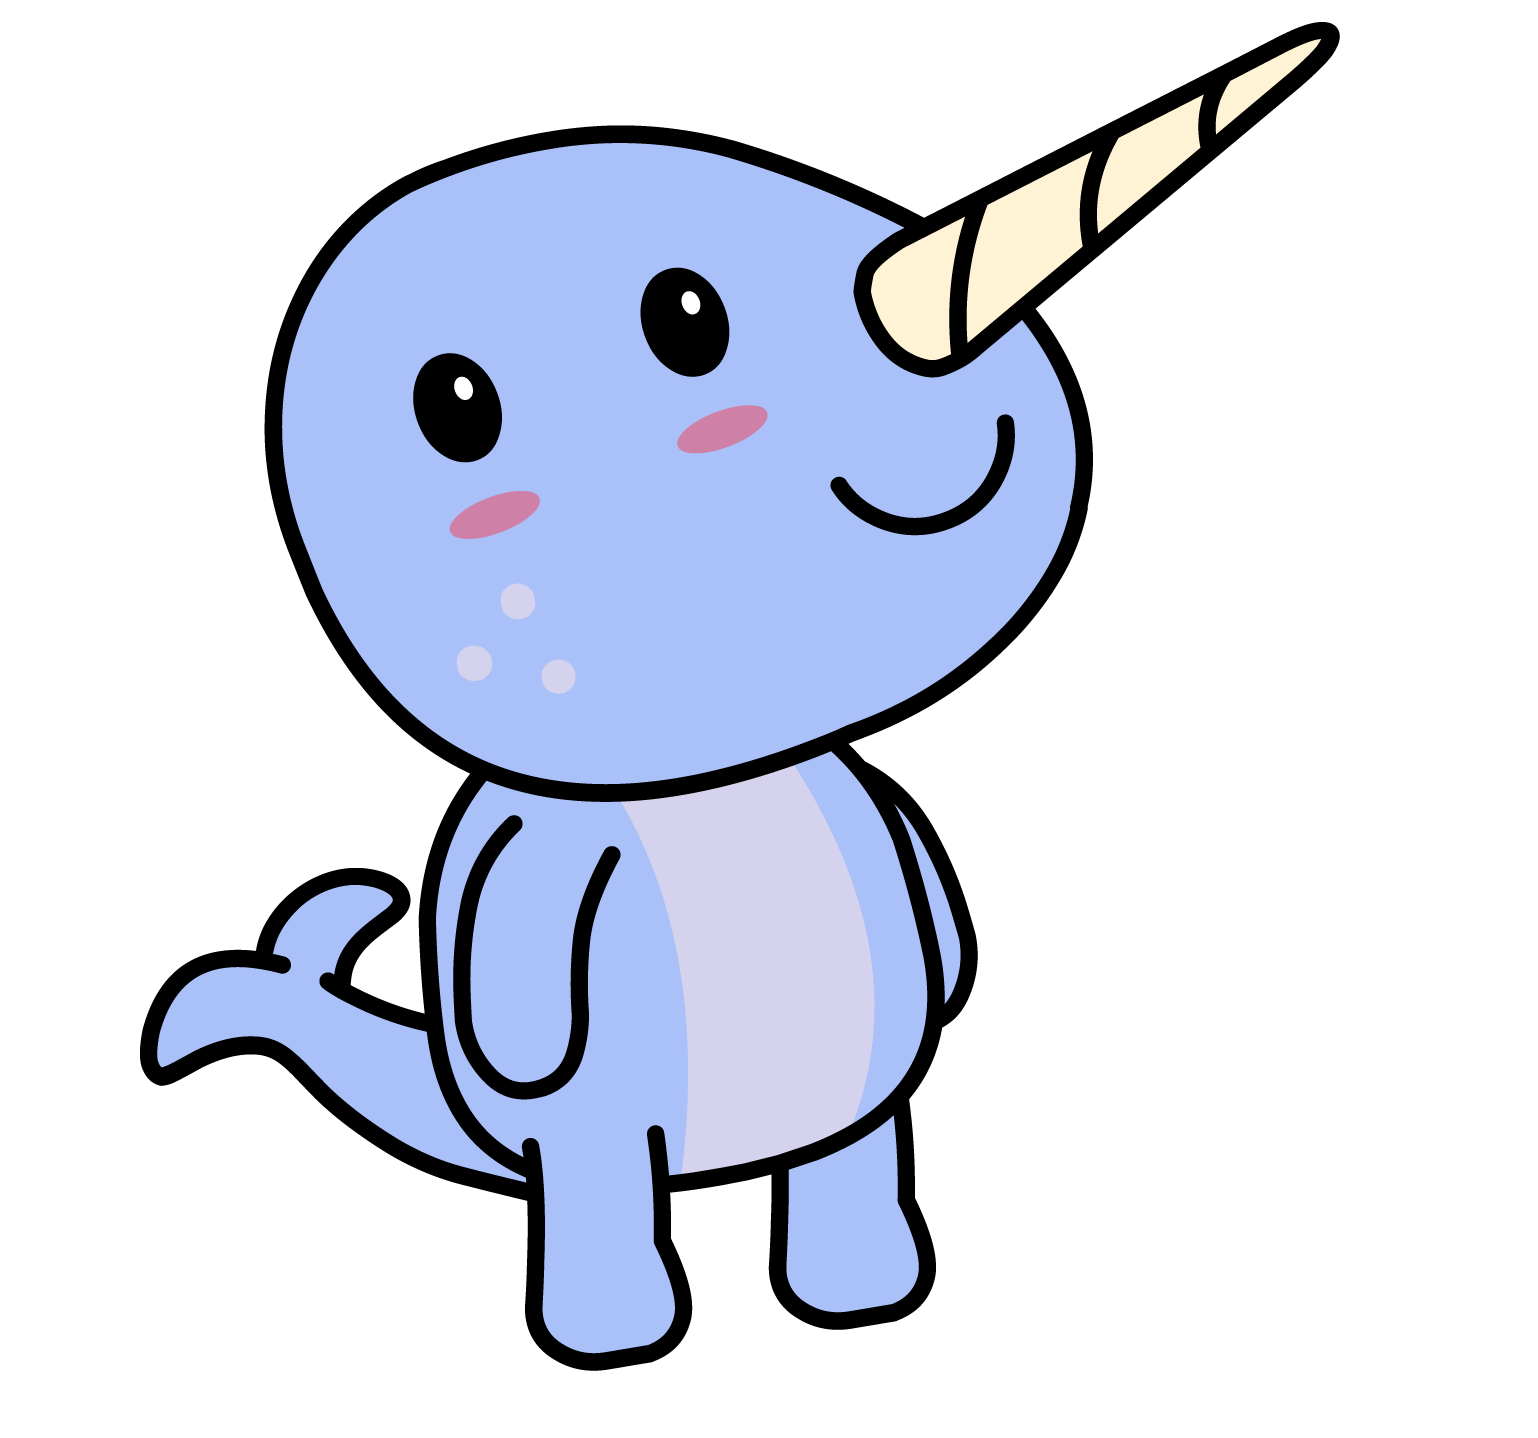 The narwhal from the SuiFrens game